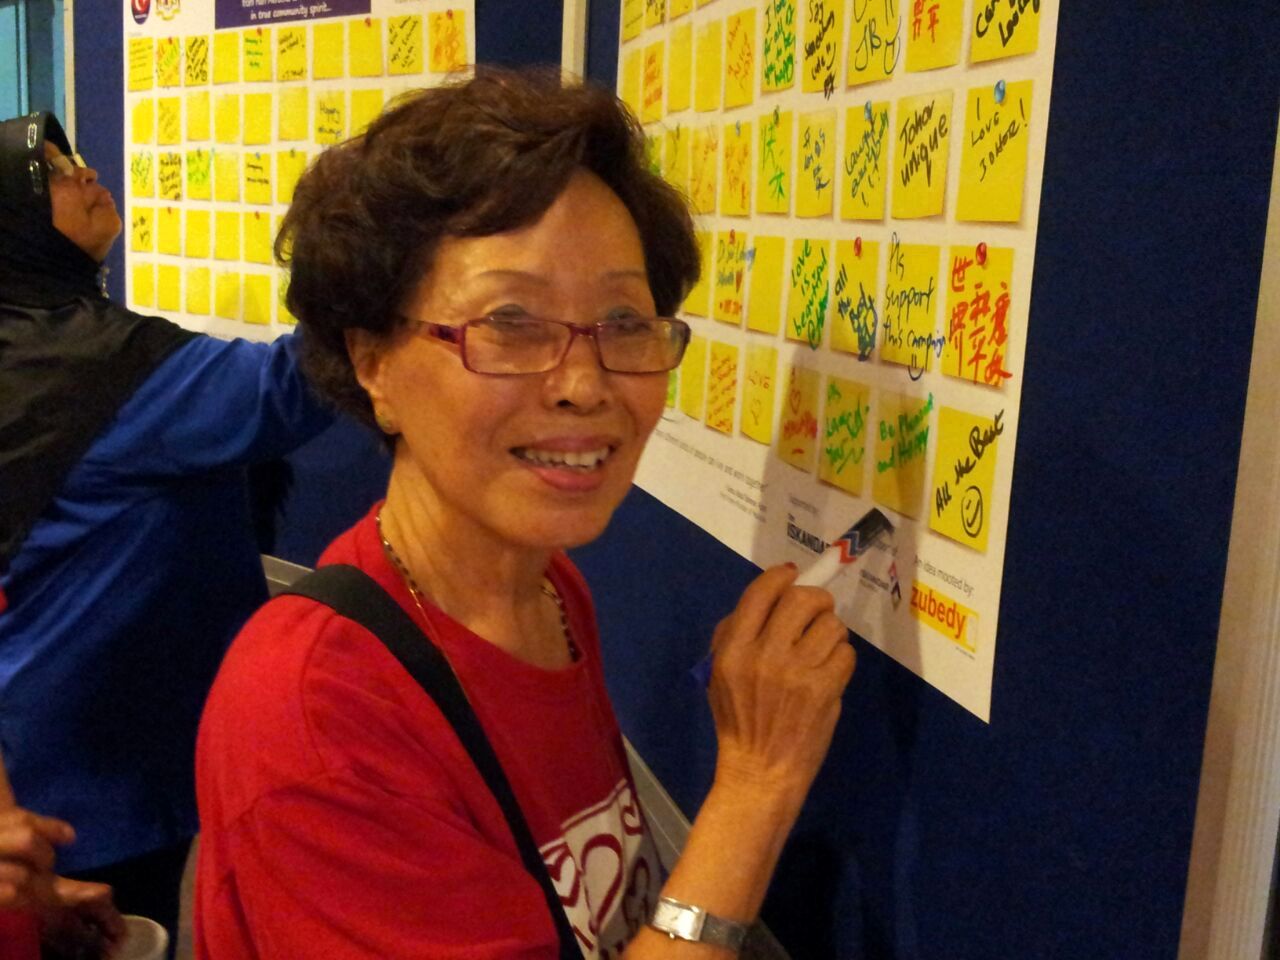 Mdm Theresa Ho writing on the chart for the campaign